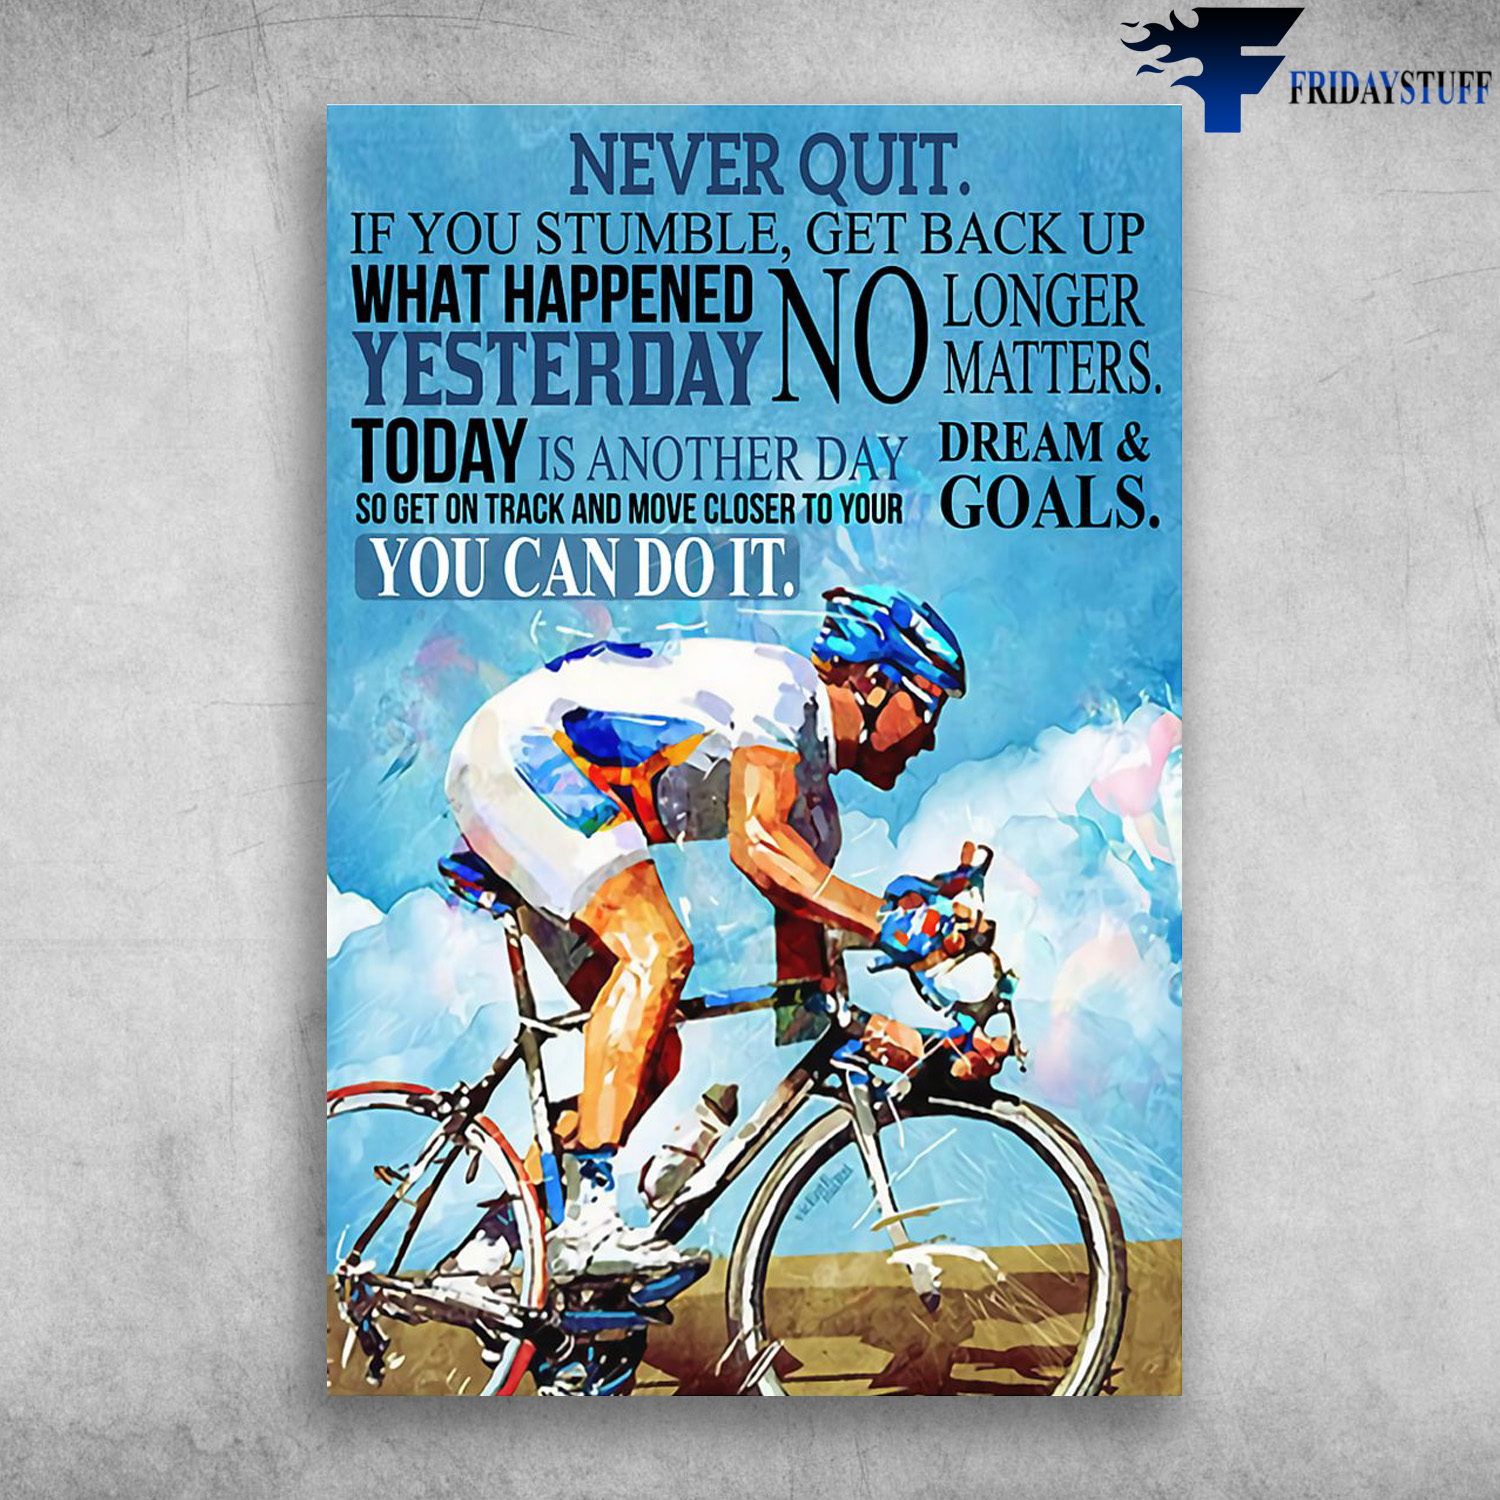 Man Riding Bicycle - Never Quit, If You Stumble, Get Back Up What Happened Yesterday